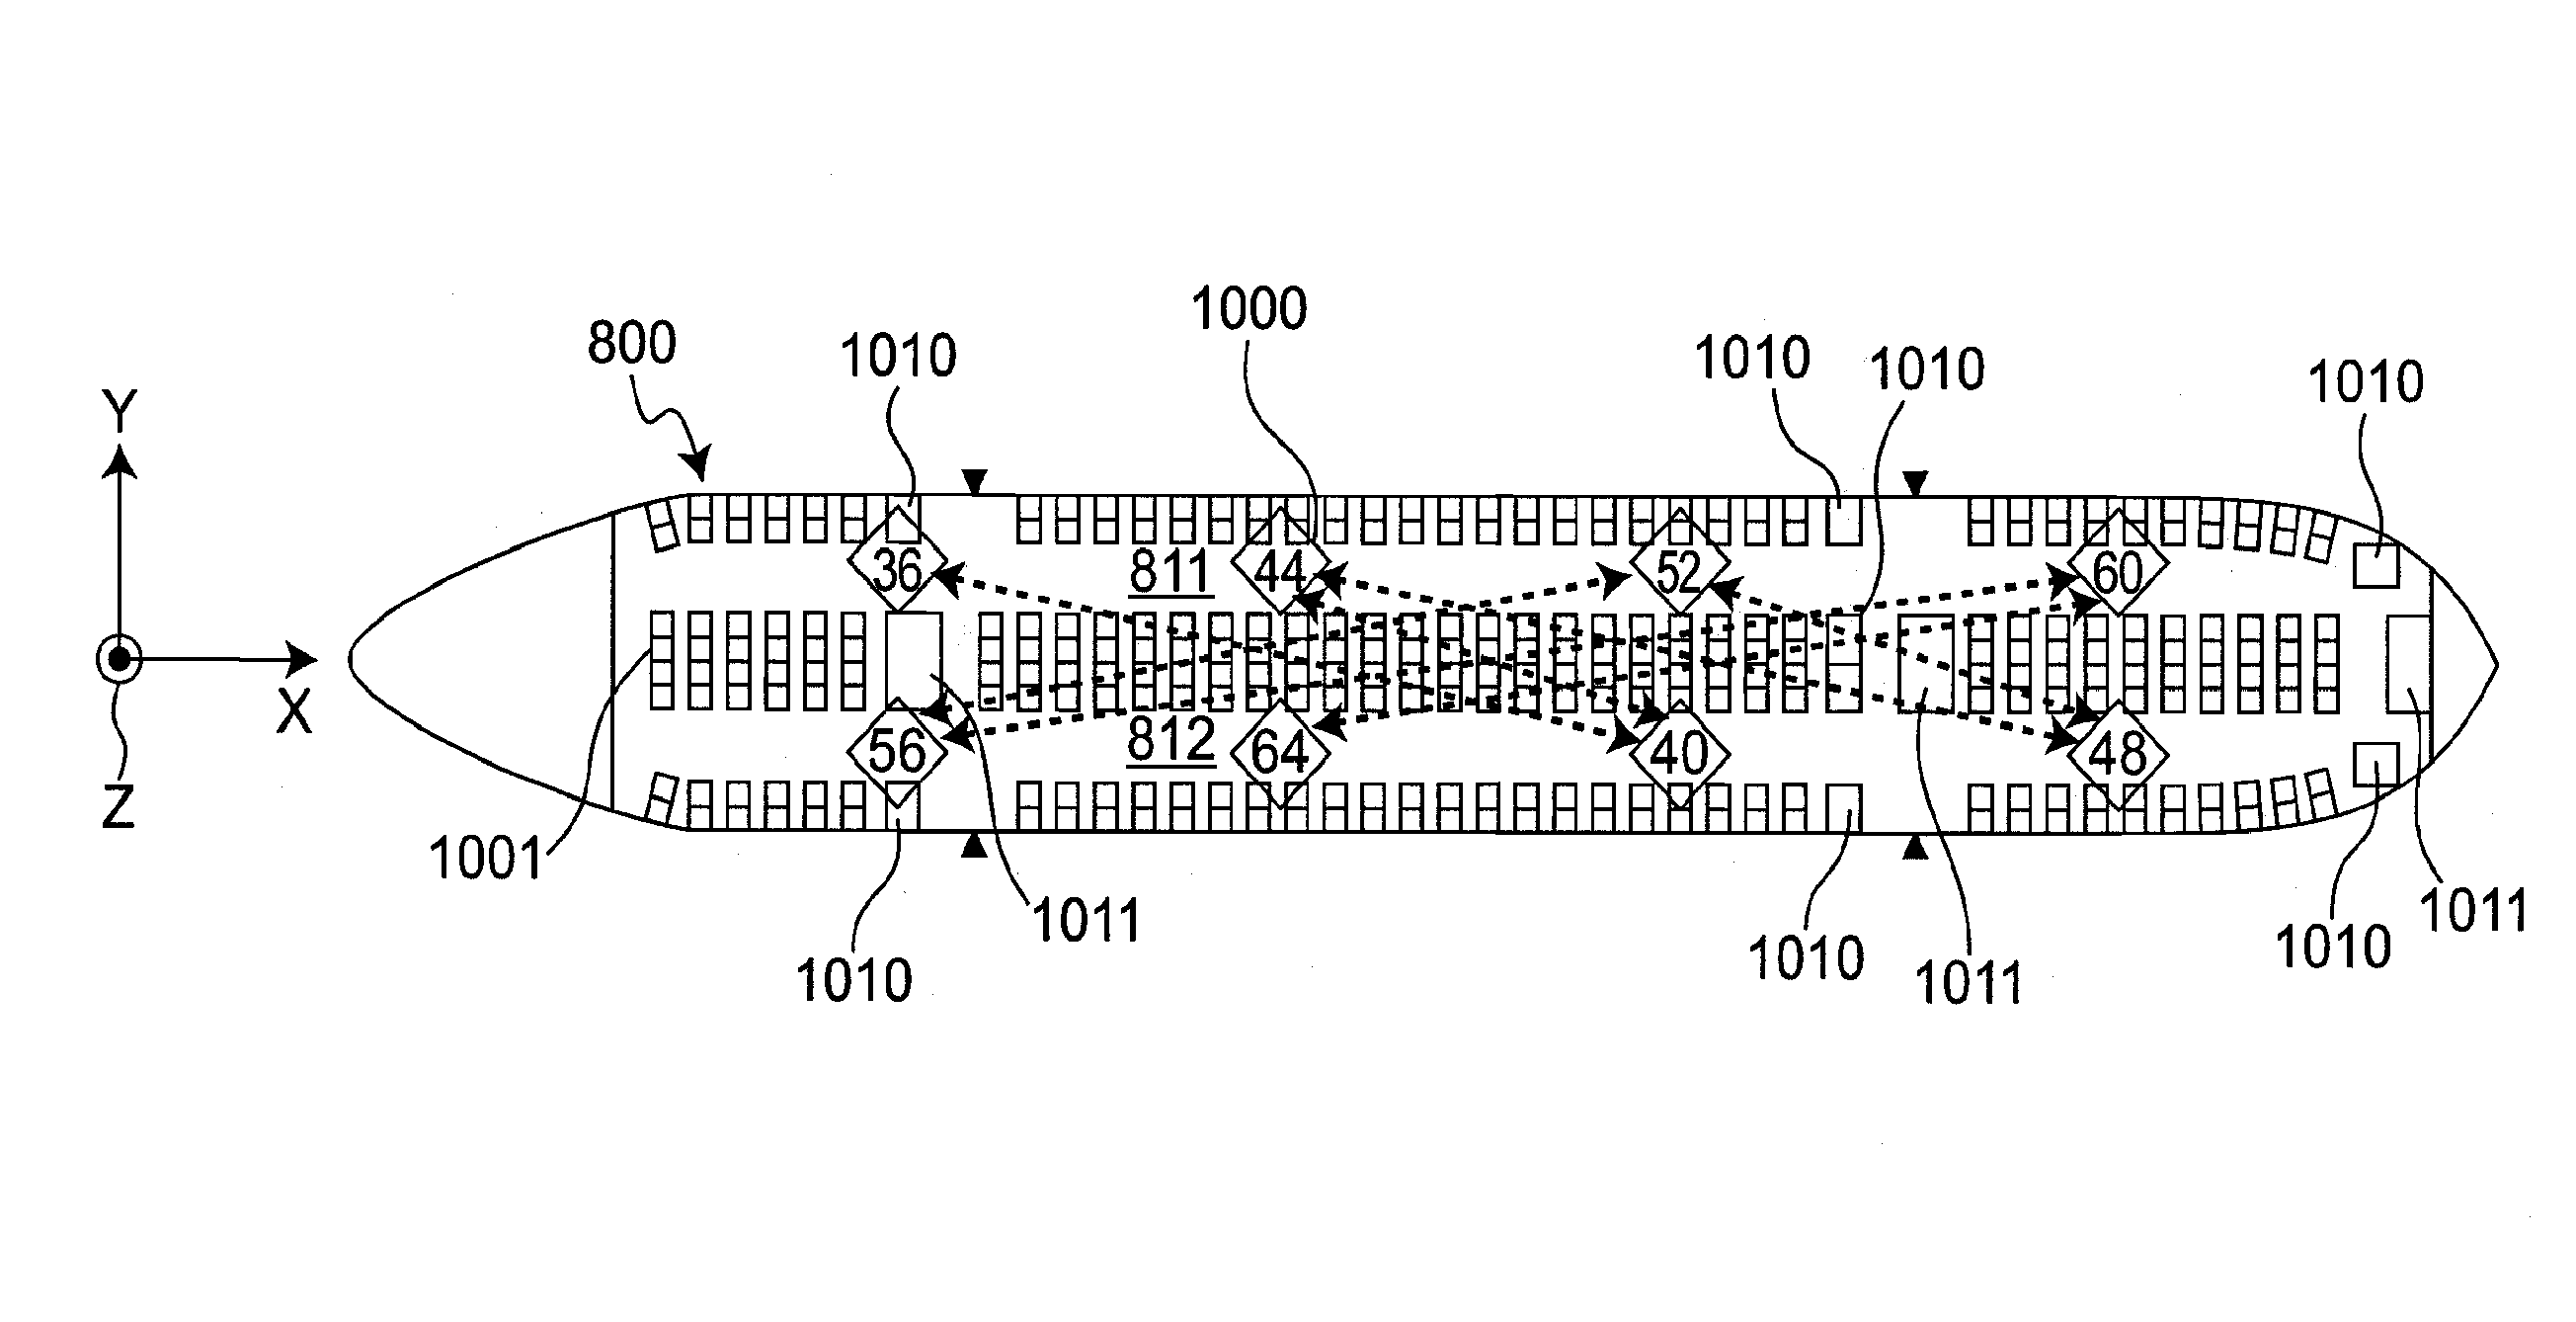 Wireless communication system provided in aircraft for communicating using plural wireless channels